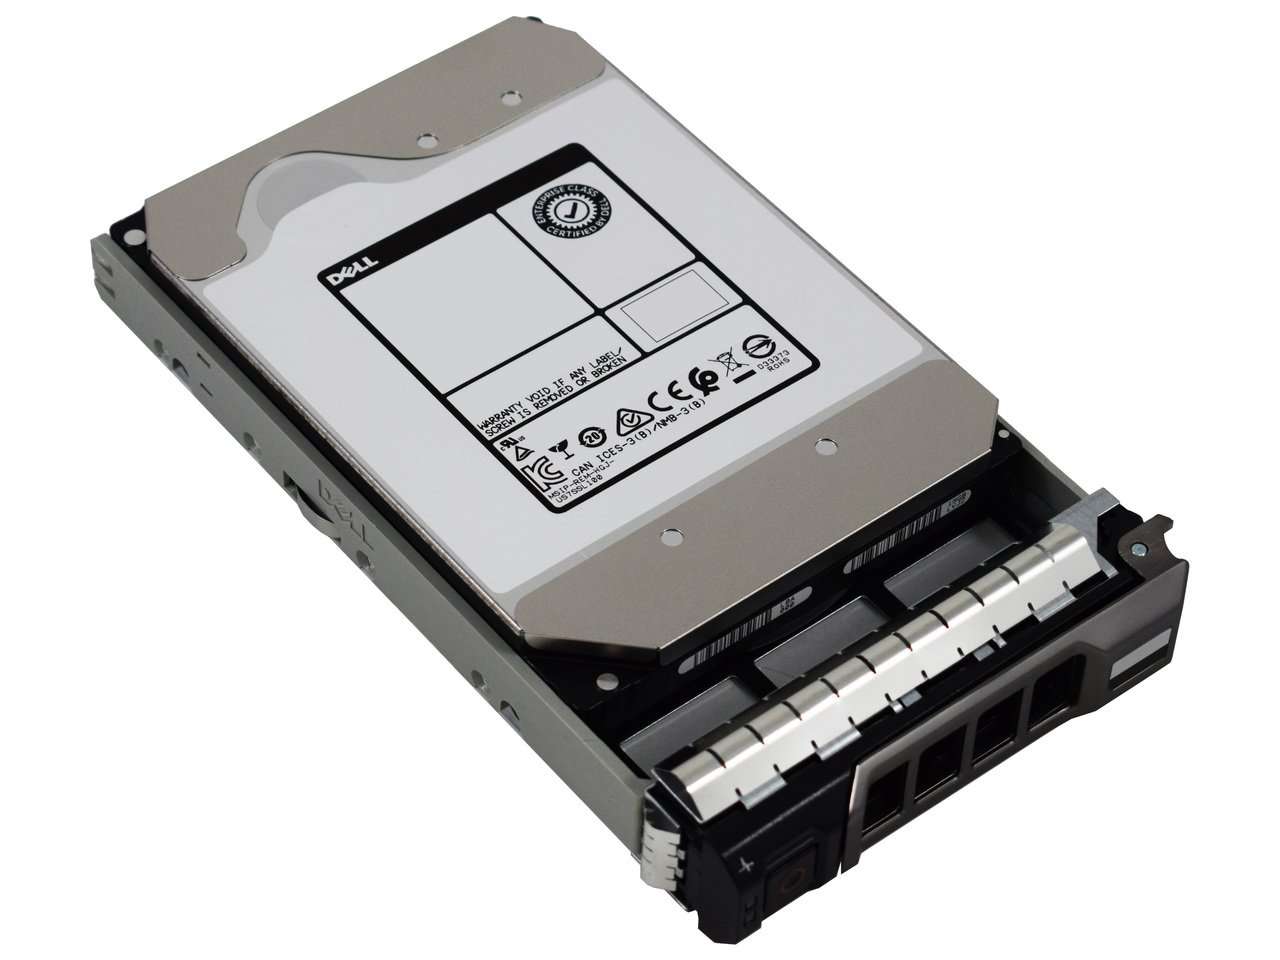 Dell G13 1D9NN 2TB 7.2K RPM SAS 6Gb/s 512n 128MB 3.5" NearLine Manufacturer Recertified HDD